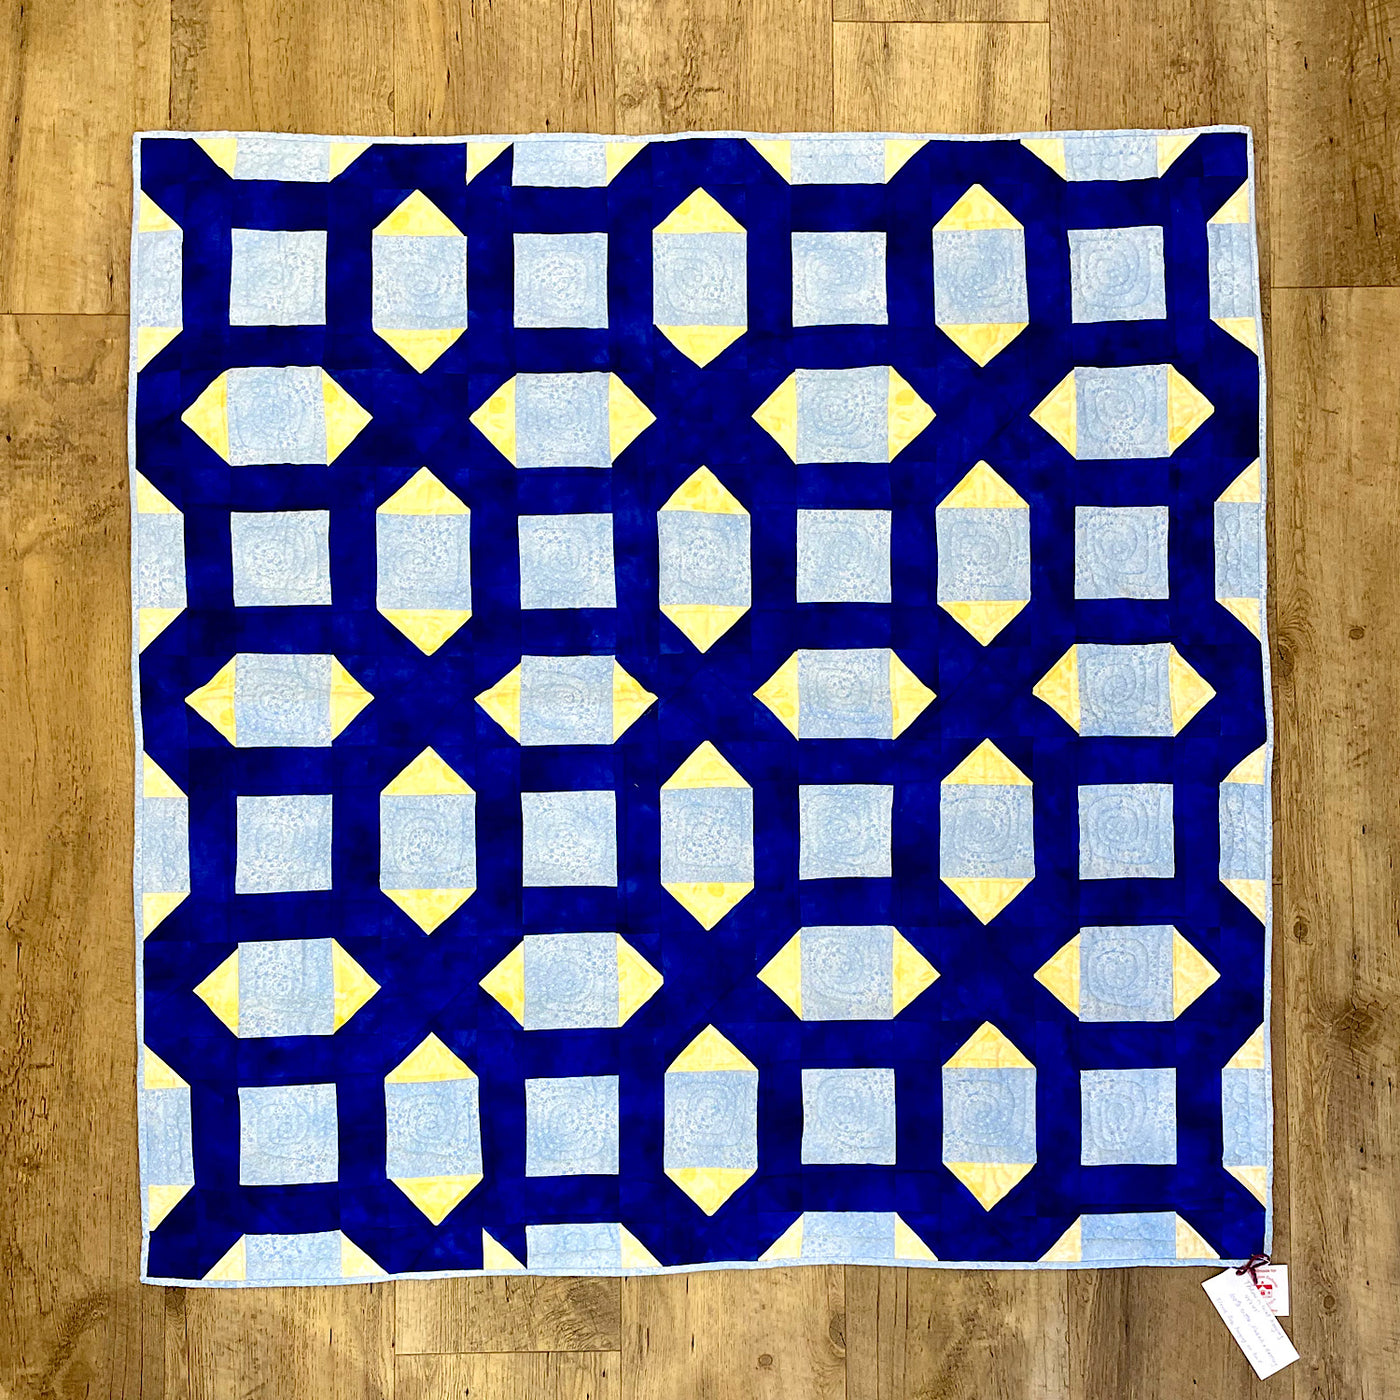 Handmade Quilt in Blues With Yellow Accents